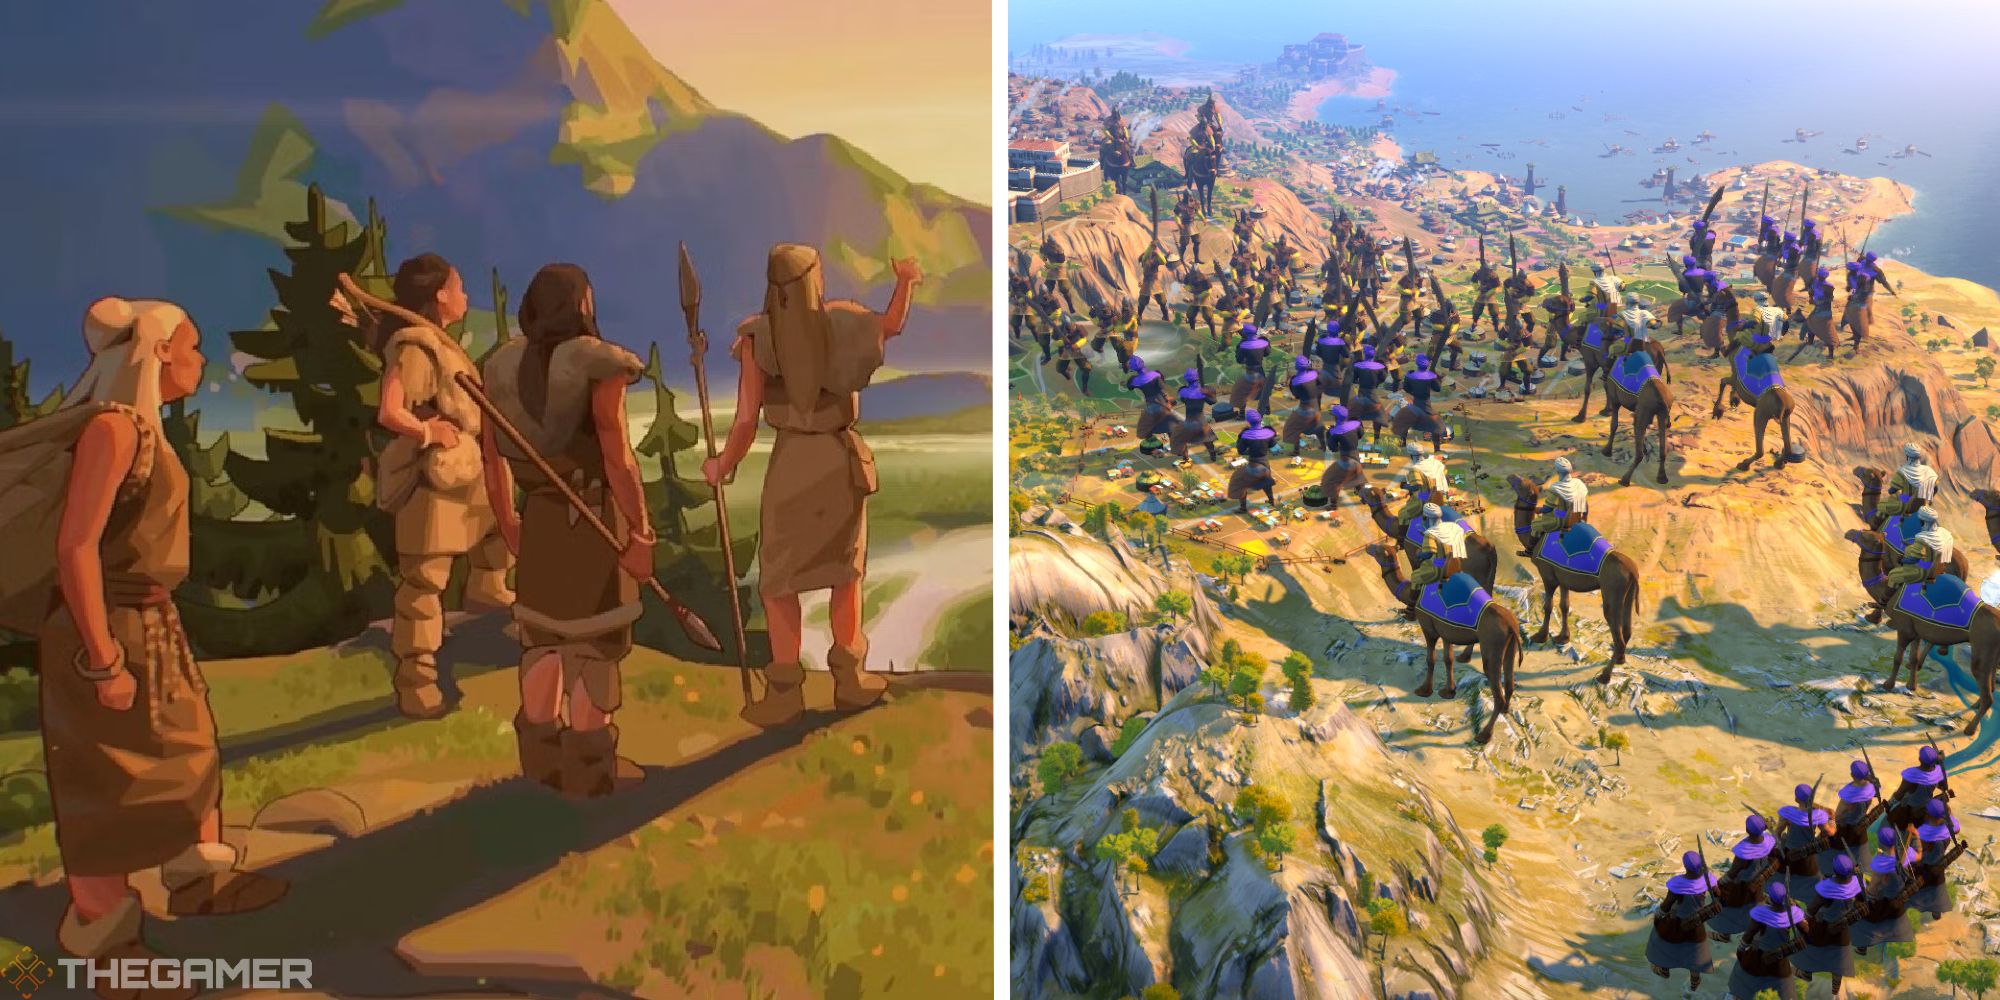 image of settlers next to image of war scenario